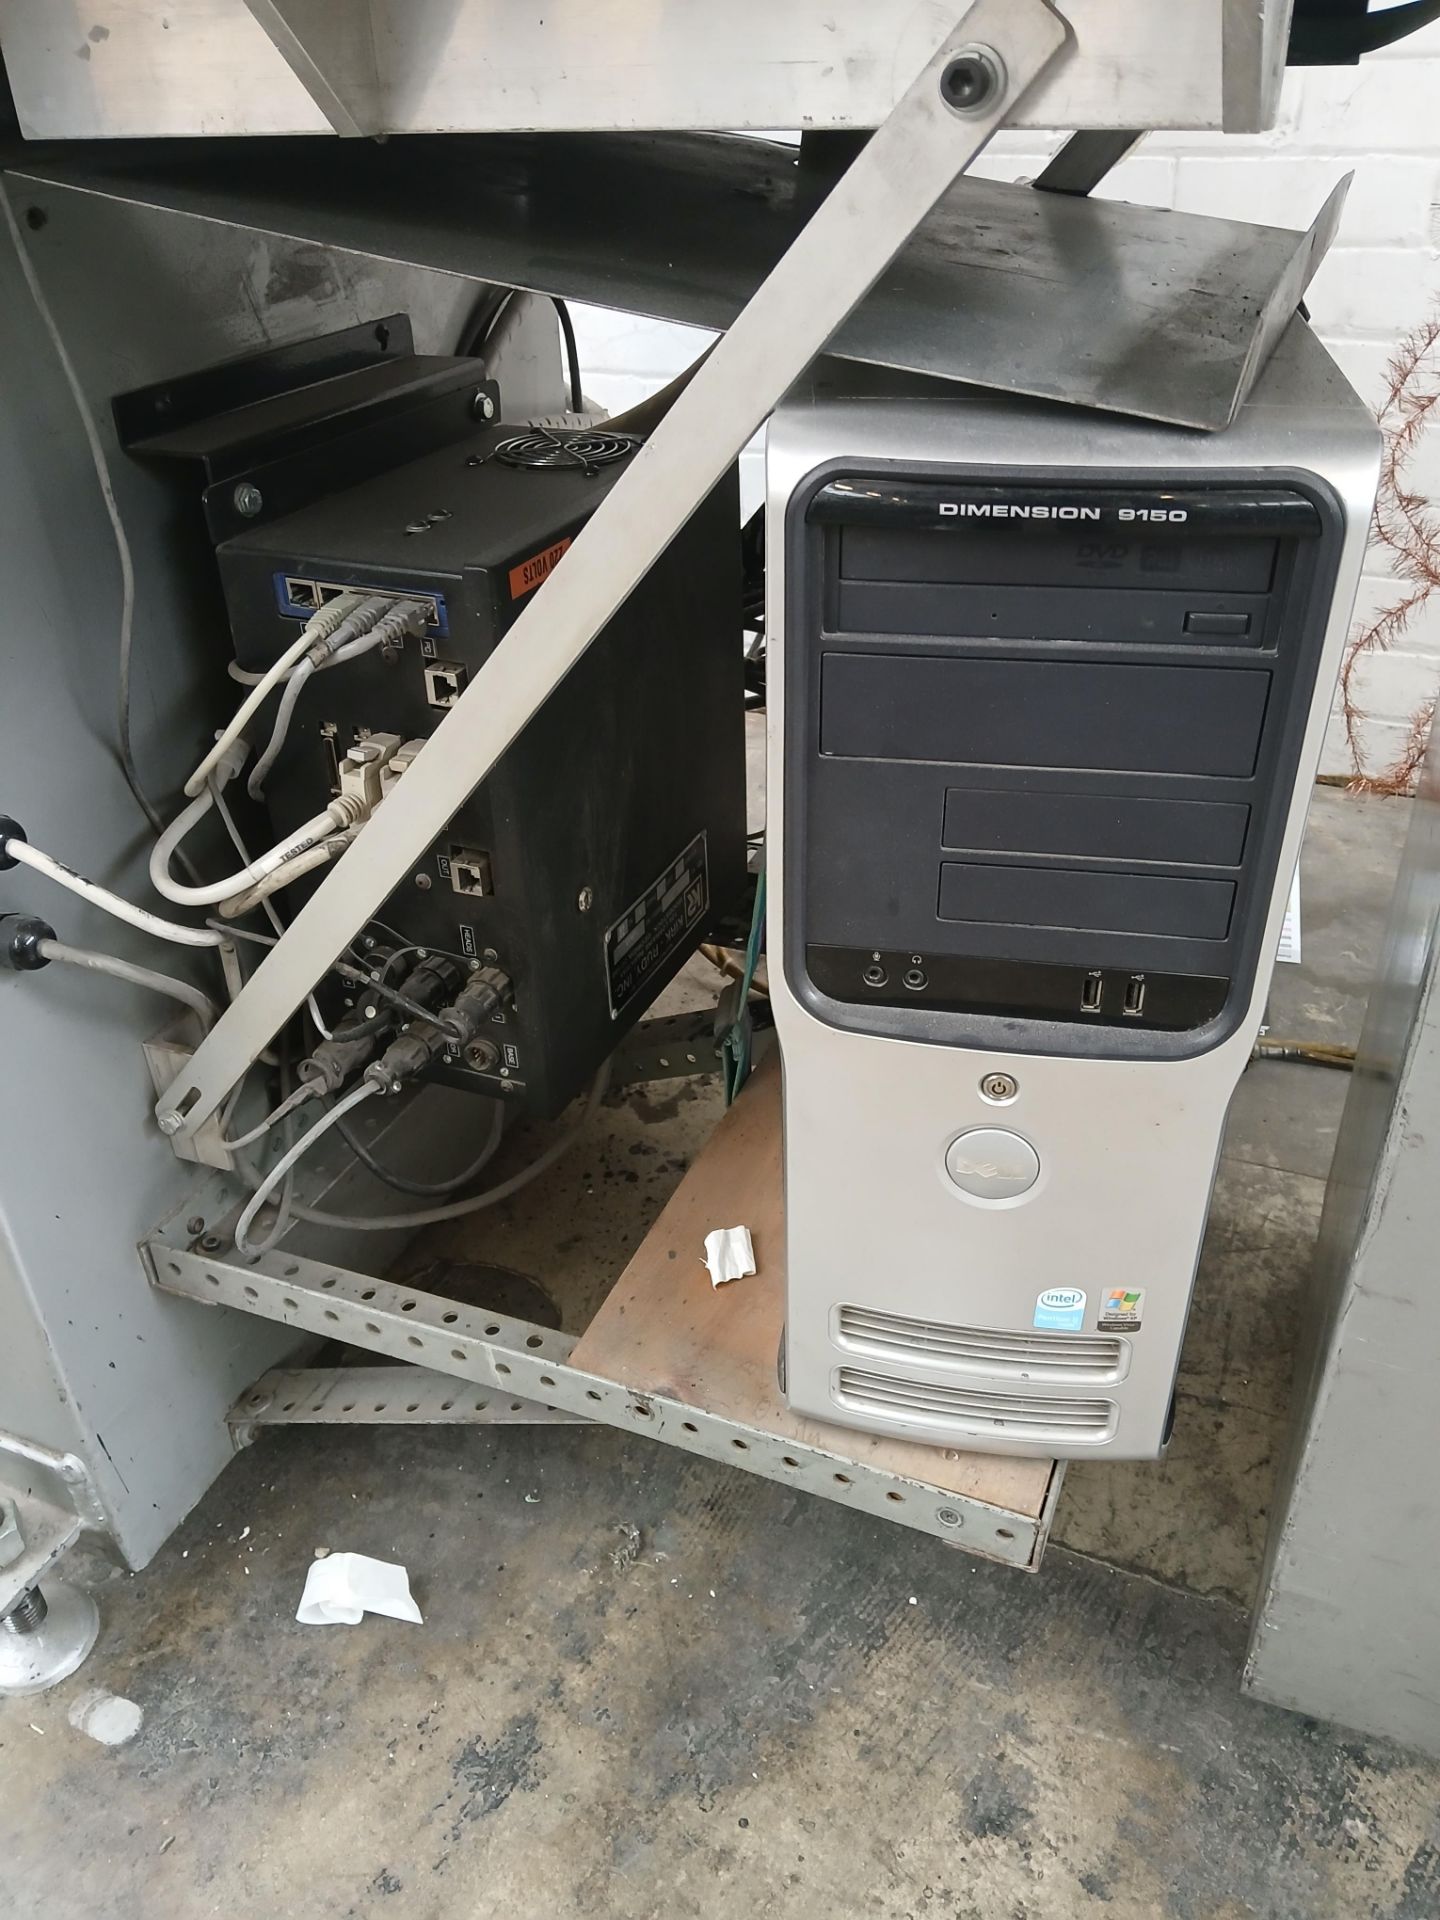 Kirk-Rudy 215V throughfeed jetmail system, Serial Number 9995176 with Dell Dimension 9150 PC control - Image 6 of 9